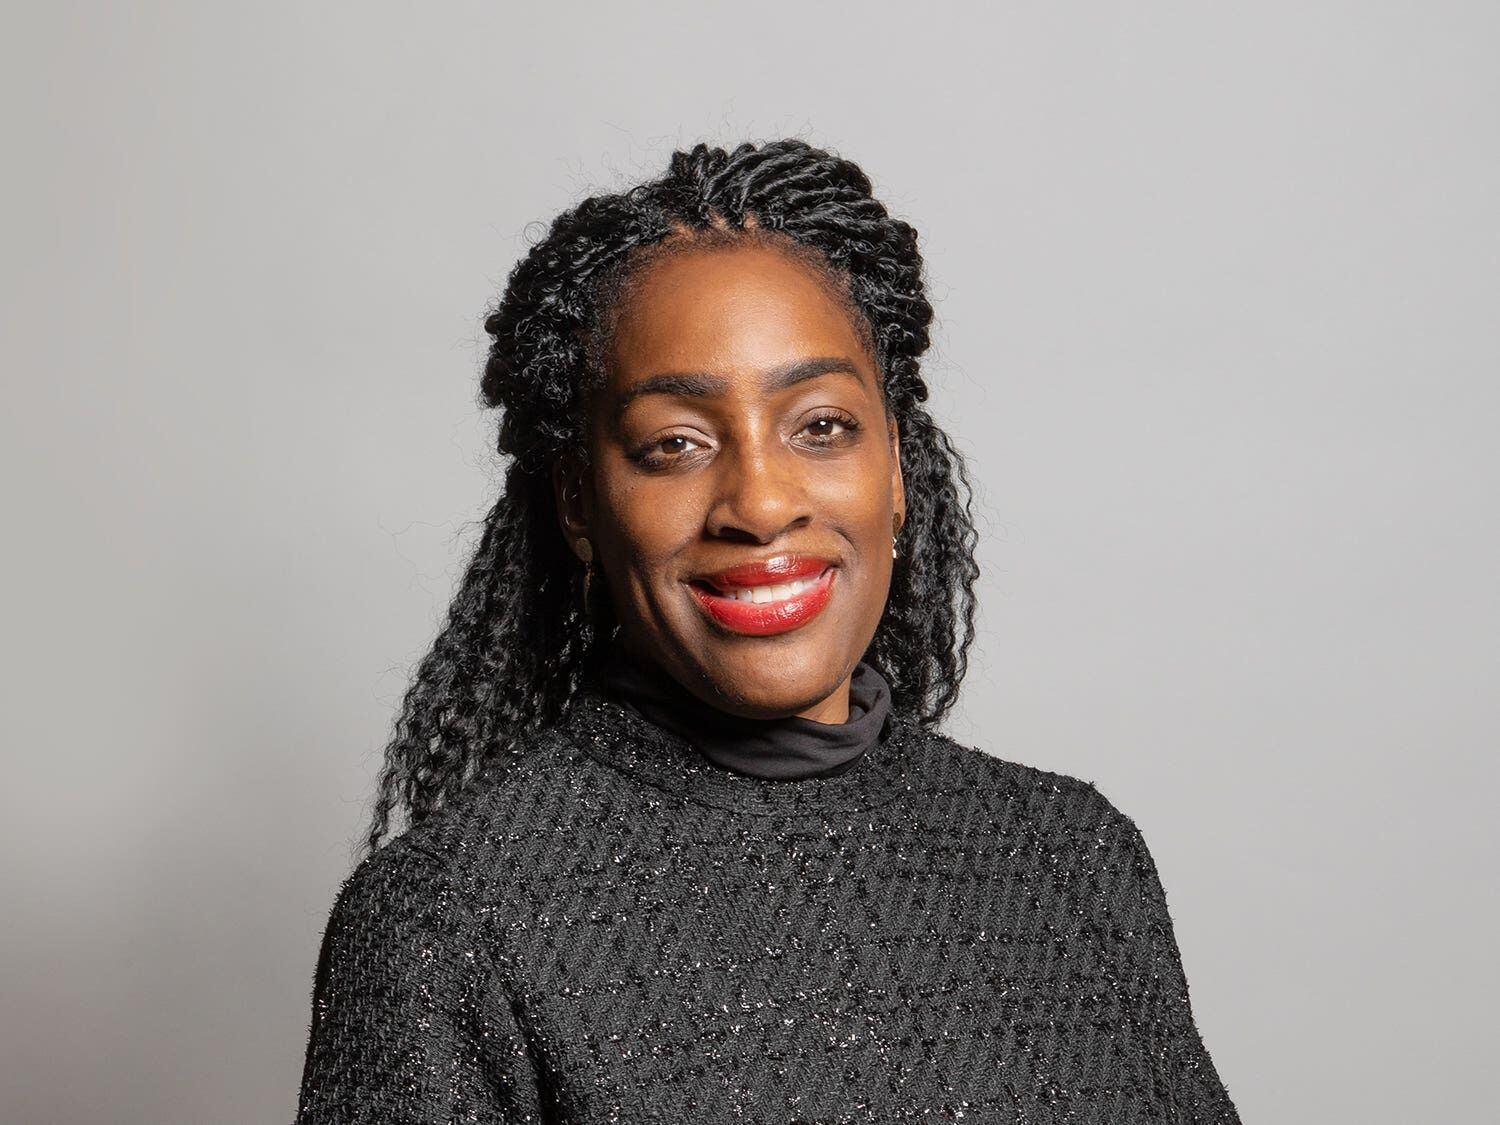 Labour whip restored to Kate Osamor after party investigation